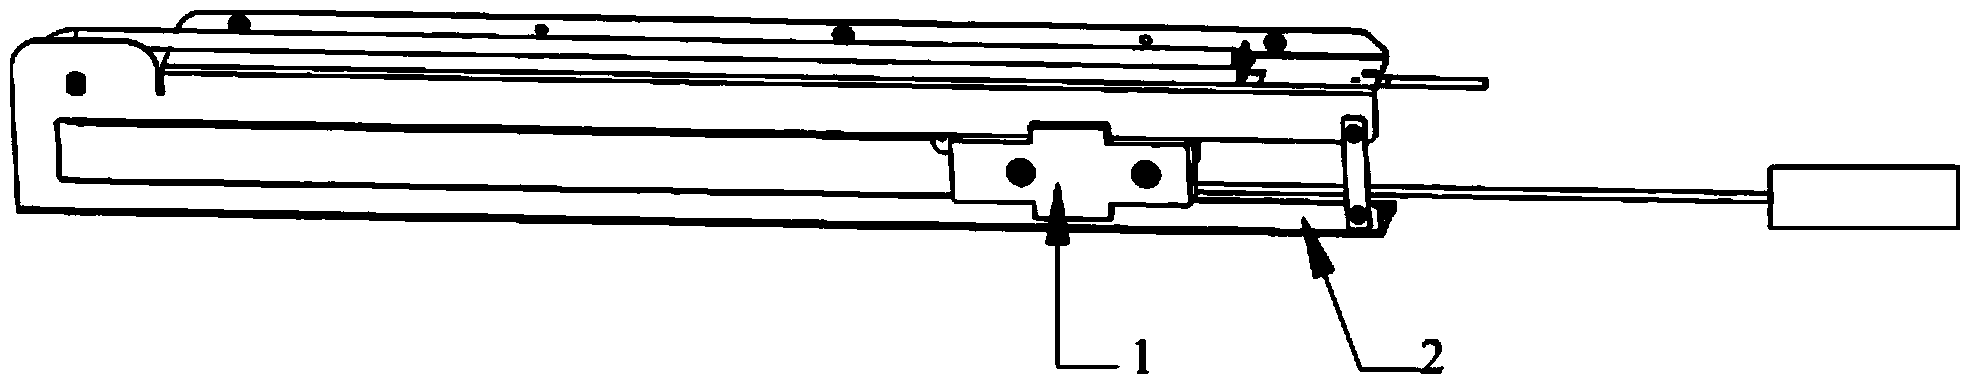 Telephone wire take-up device